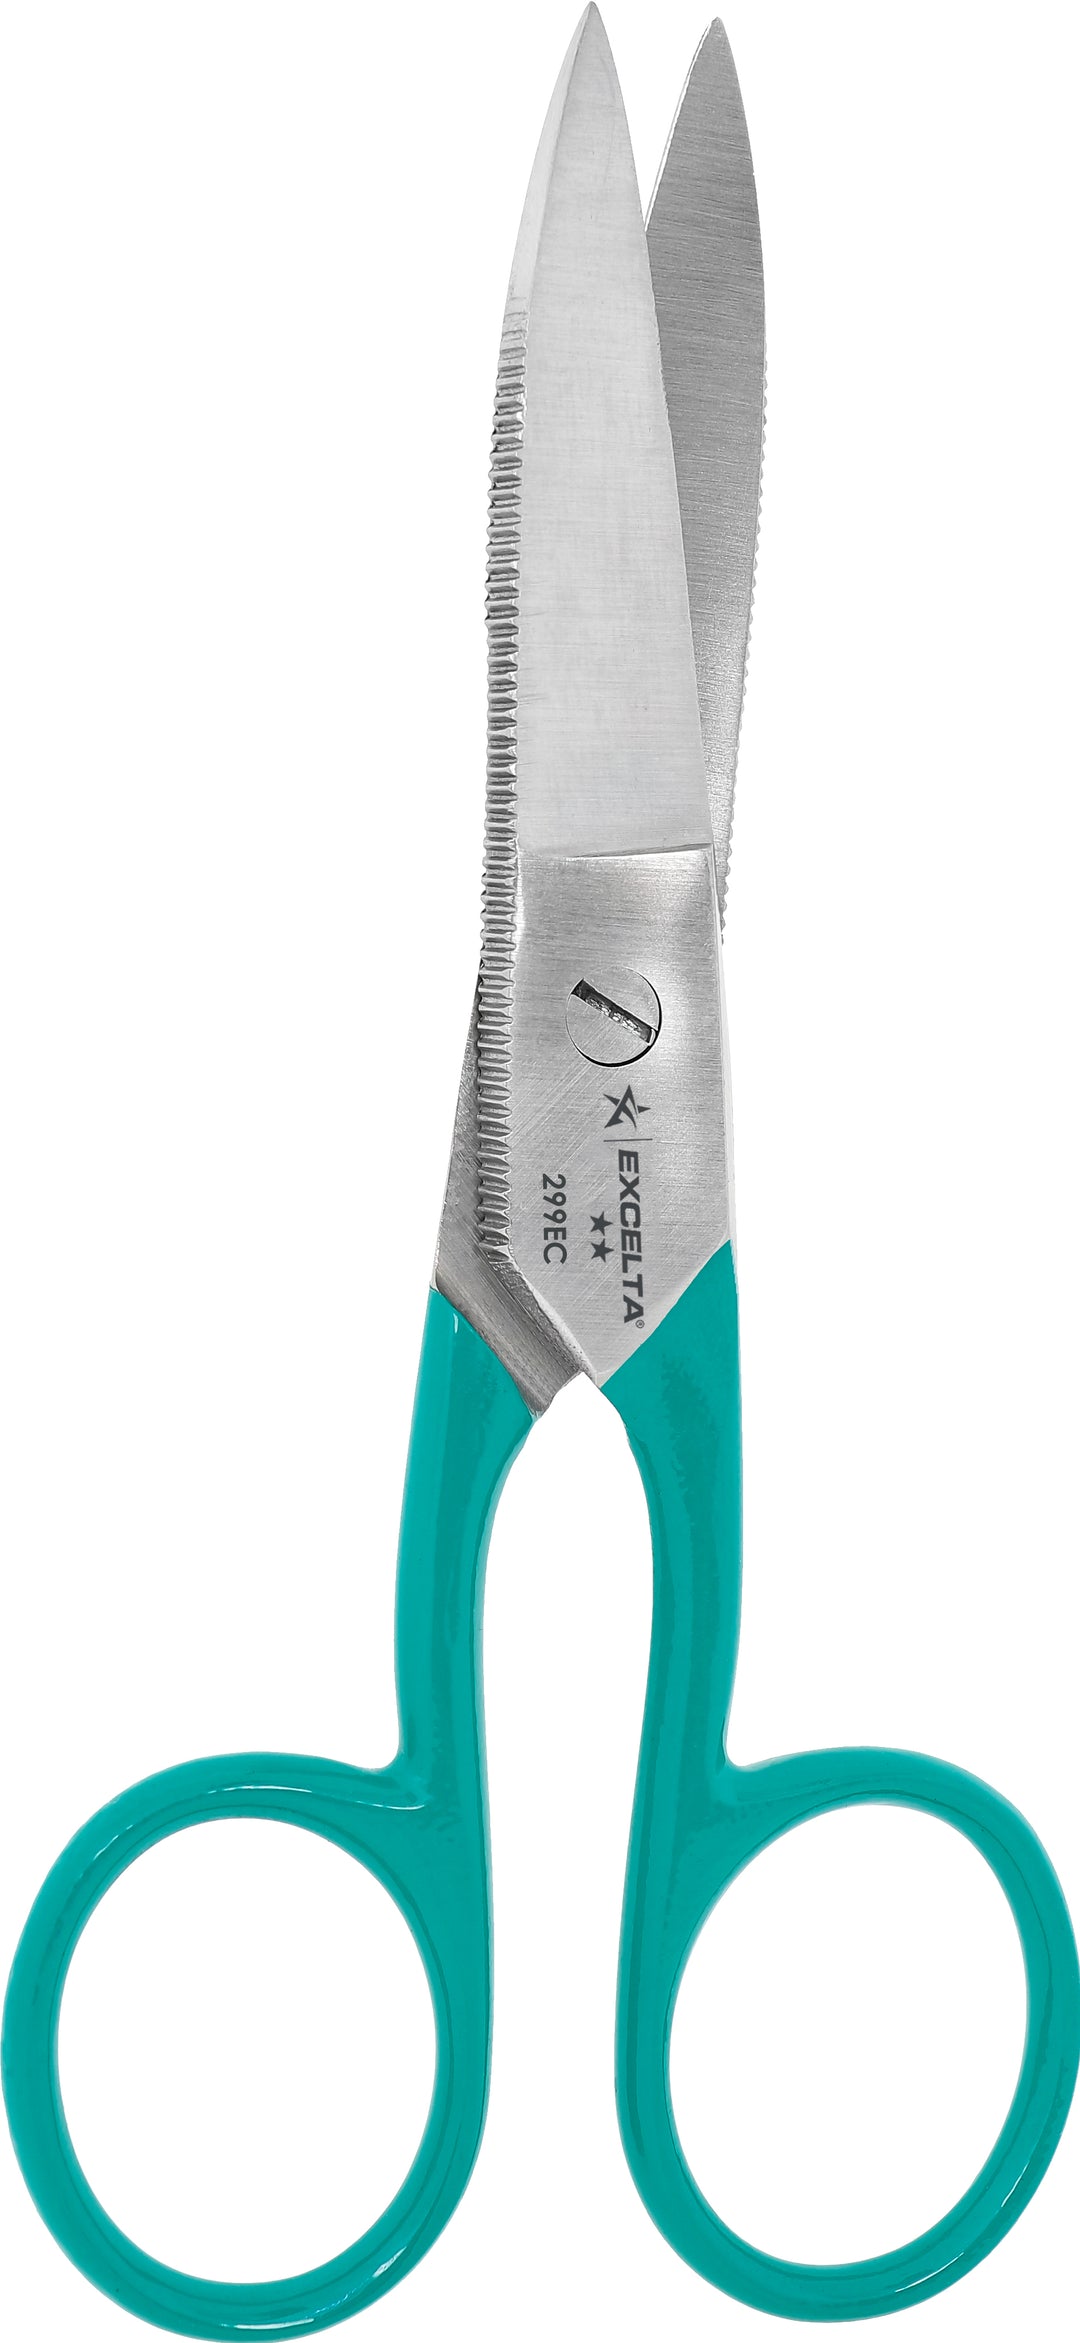 Excelta 299EC Scissors - Electrician - Straight 1.75 inch Blade - SS - Oal 5 inch - Epoxy Coated